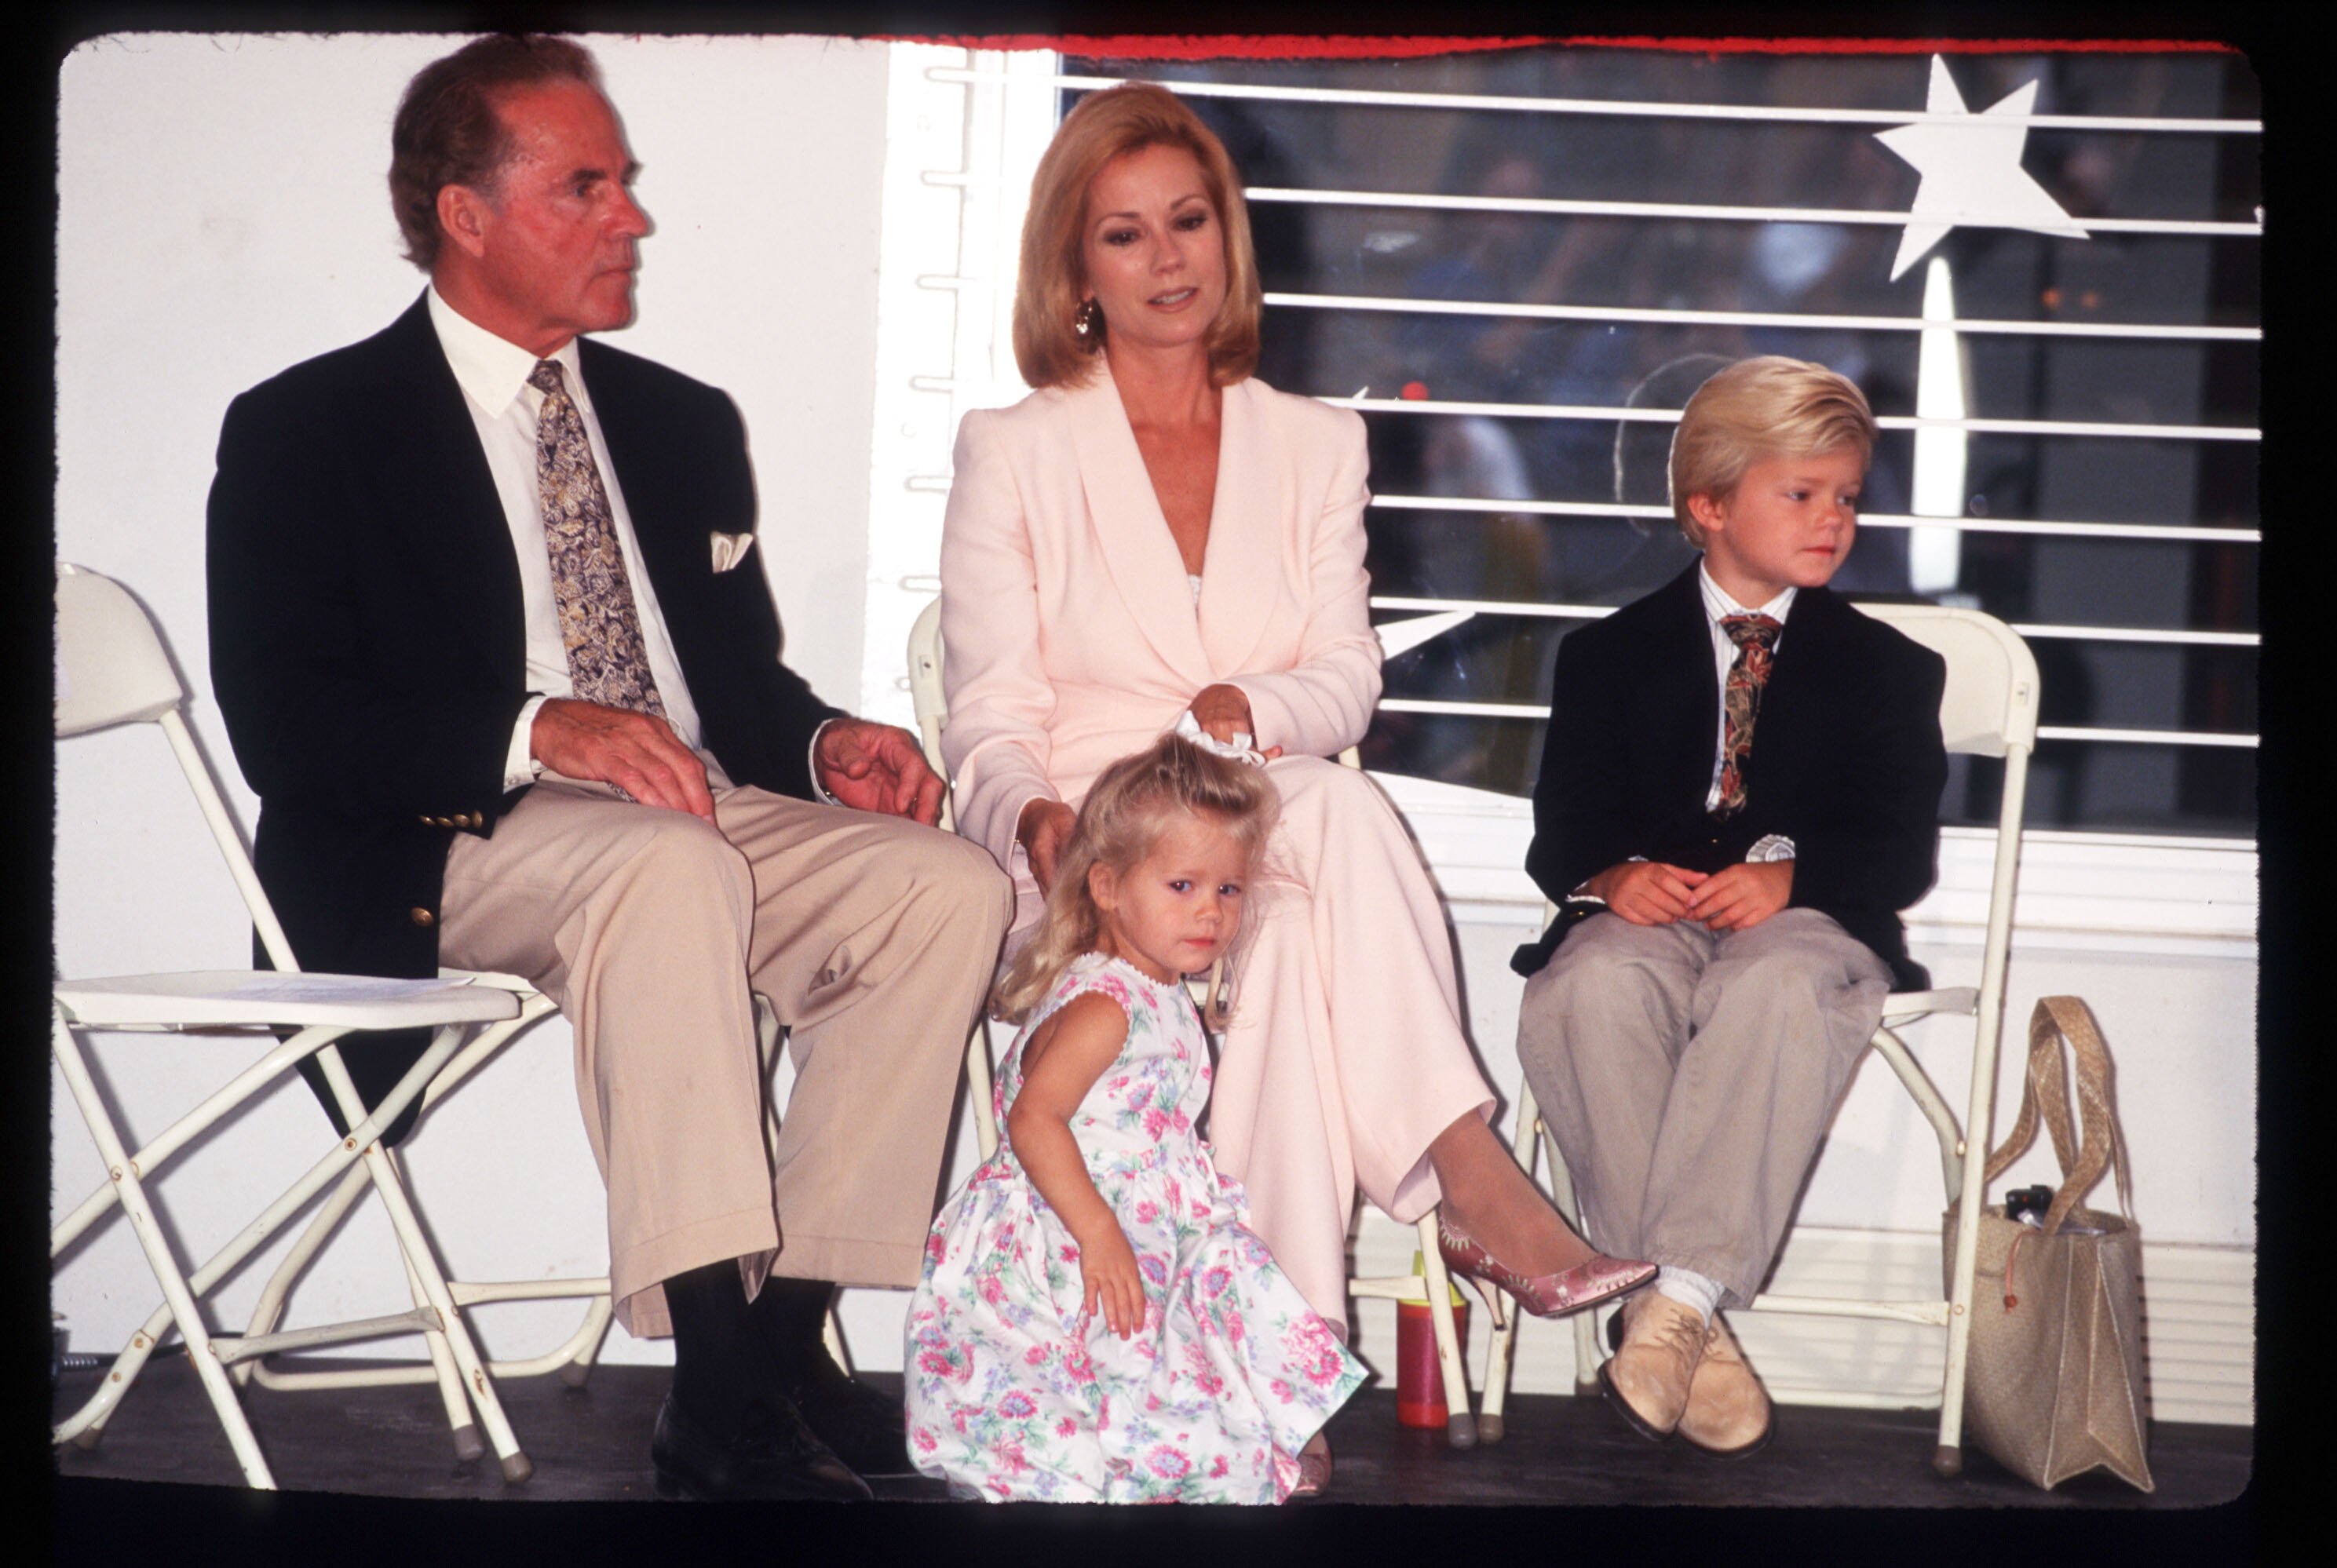 Frank and Kathie Lee Gifford with her children on June 10, 1996 in New York City | Source: Getty Images